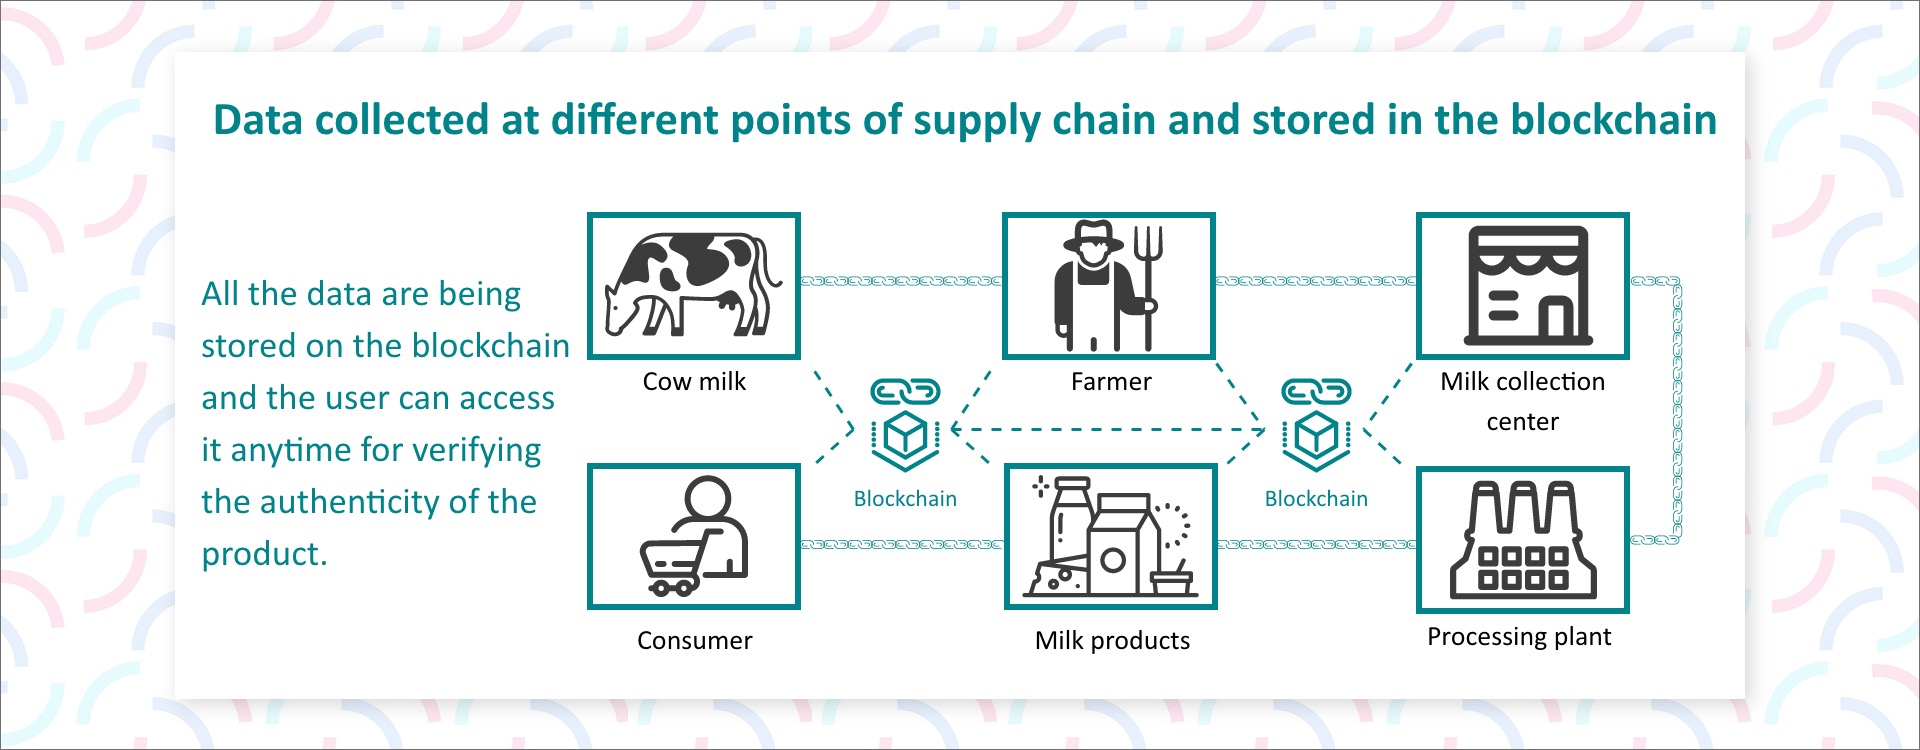 Diagram showcasing data collection at various supply chain points, securely stored in the blockchain for enhanced transparency and traceability